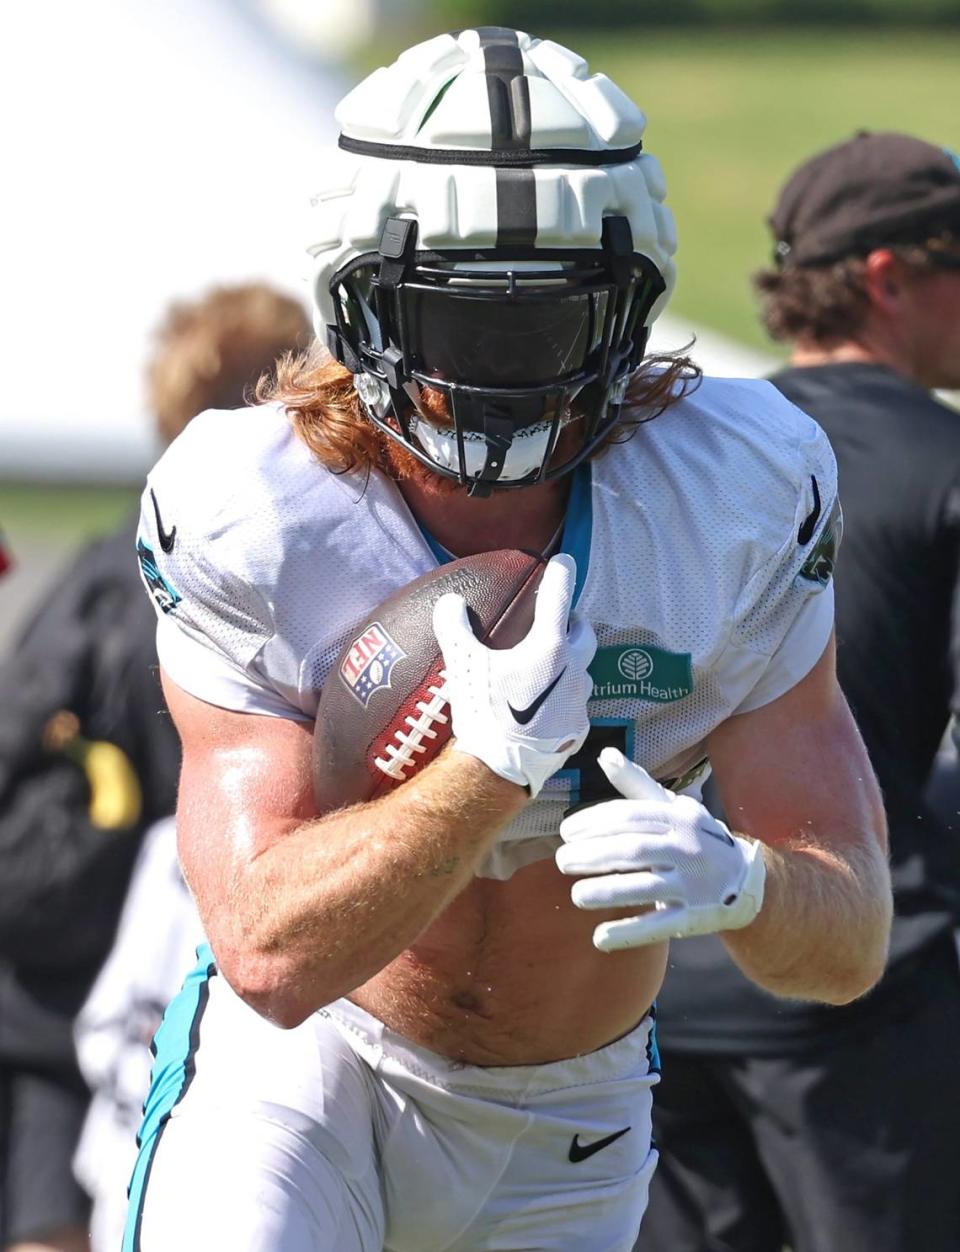 Carolina Panthers tight end Hayden Hurst carries the ball downfield after catching a pass during the team’s joint practice with the New York Jets on Wednesday, August 9, 2023 at Wofford College in Spartanburg, SC.